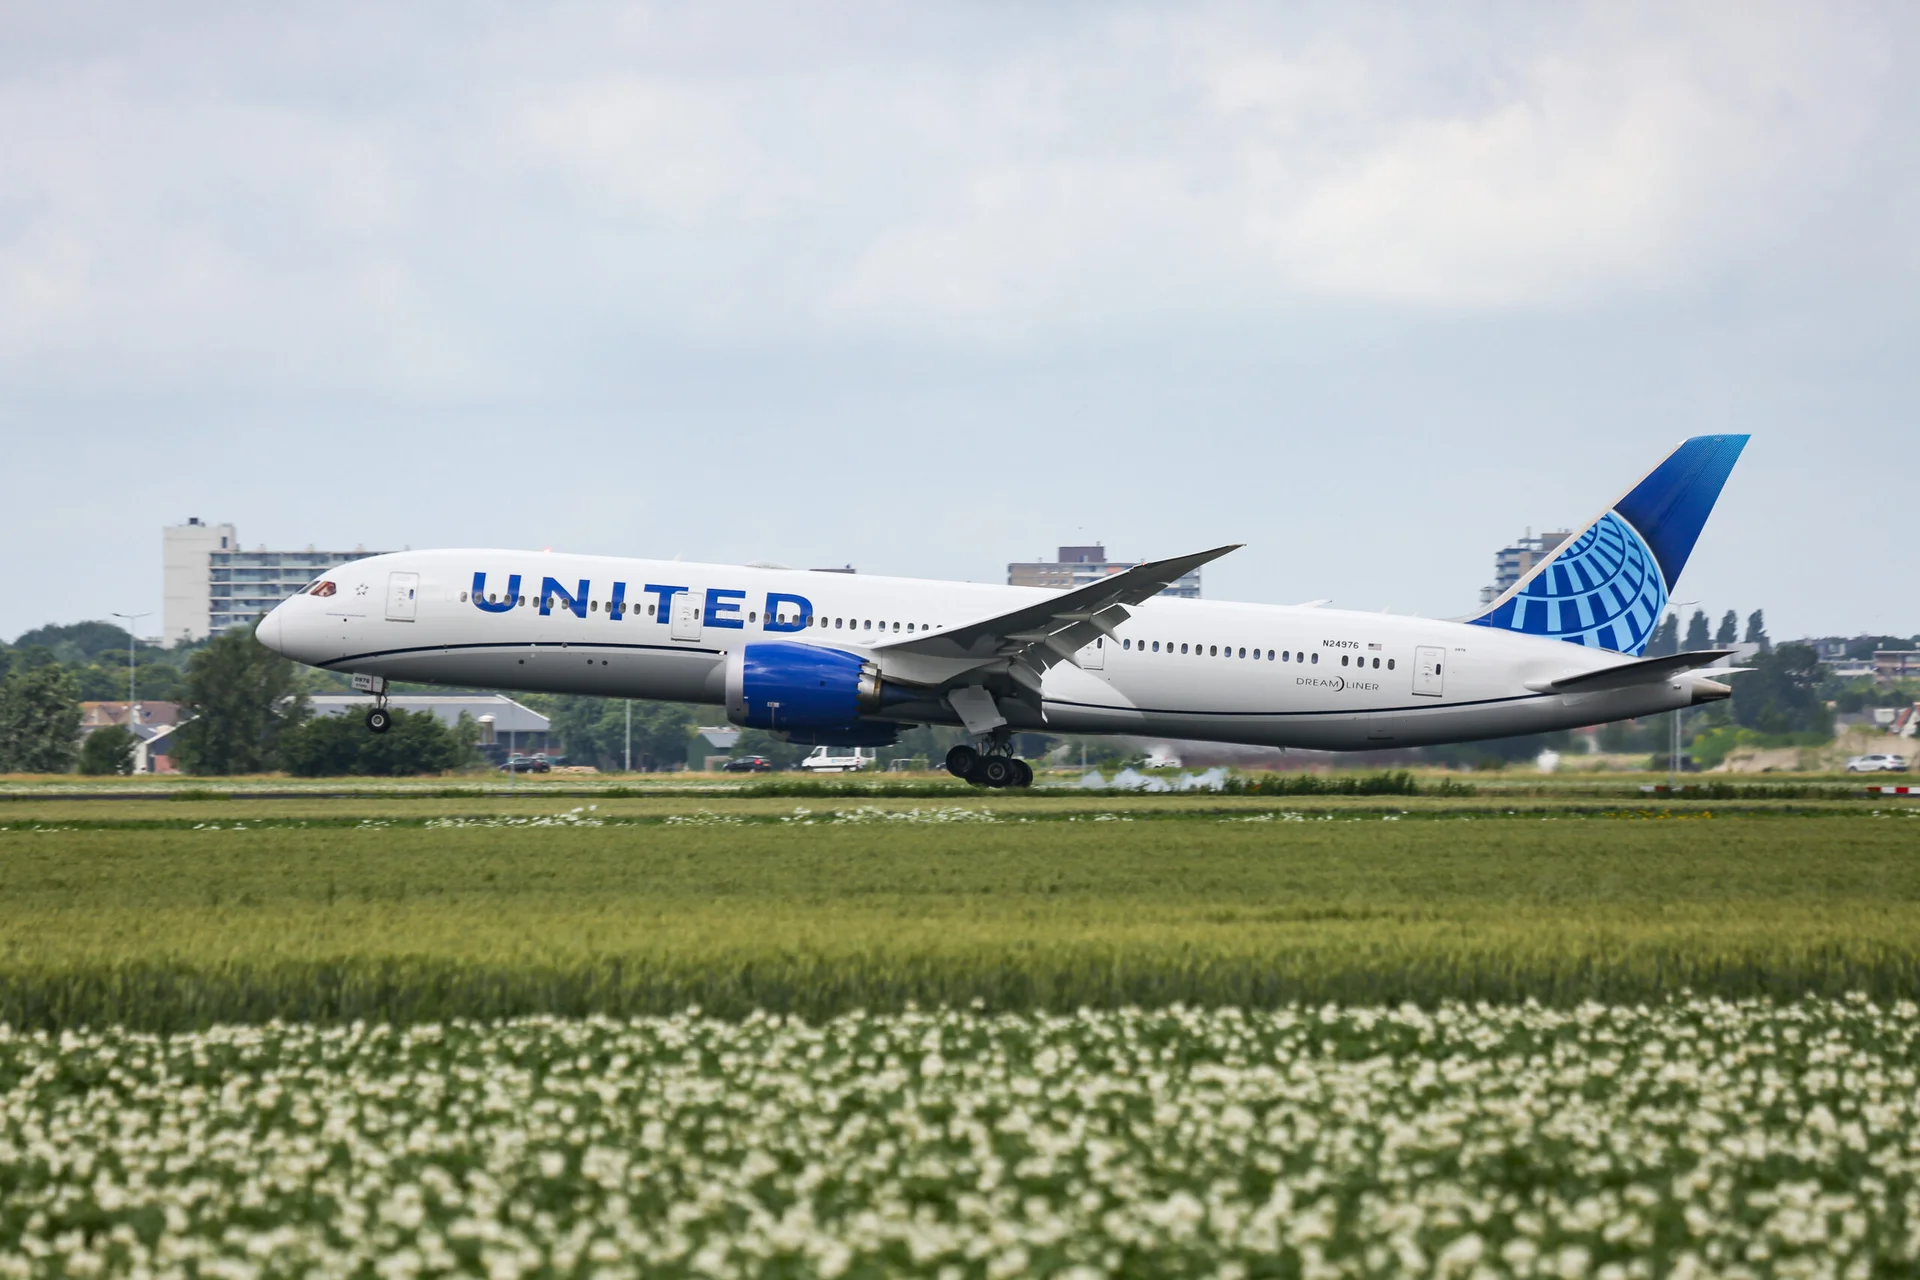 Up to 200 Boeing 787s will be ordered by United Airlines, paving the way for a widebody fleet renewal.